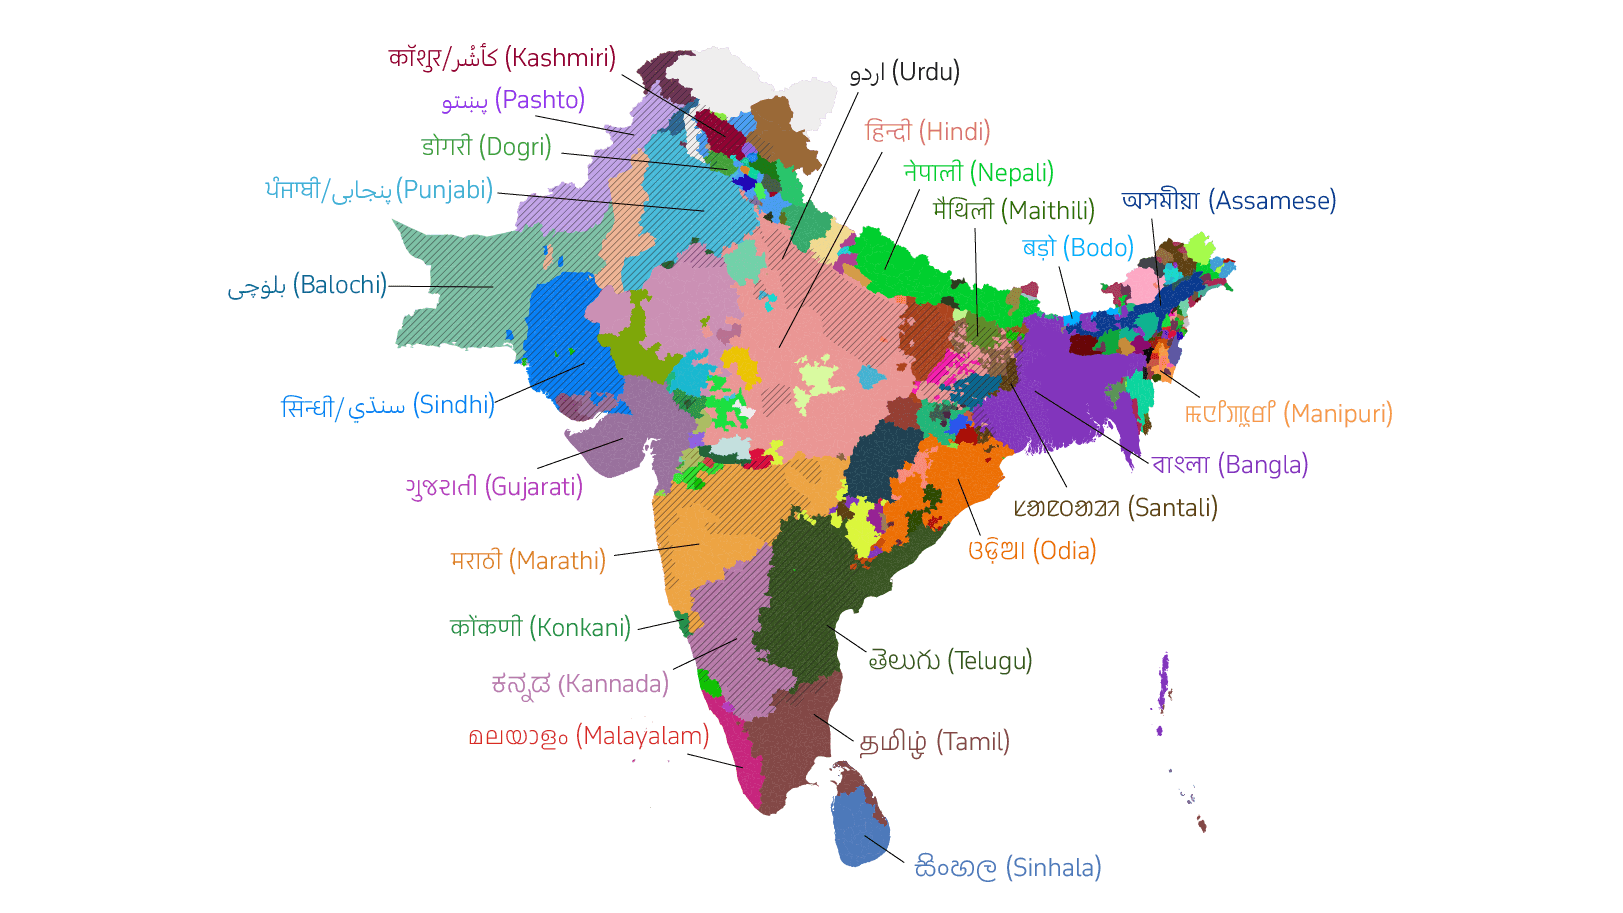 Languages of Indian sub-continent